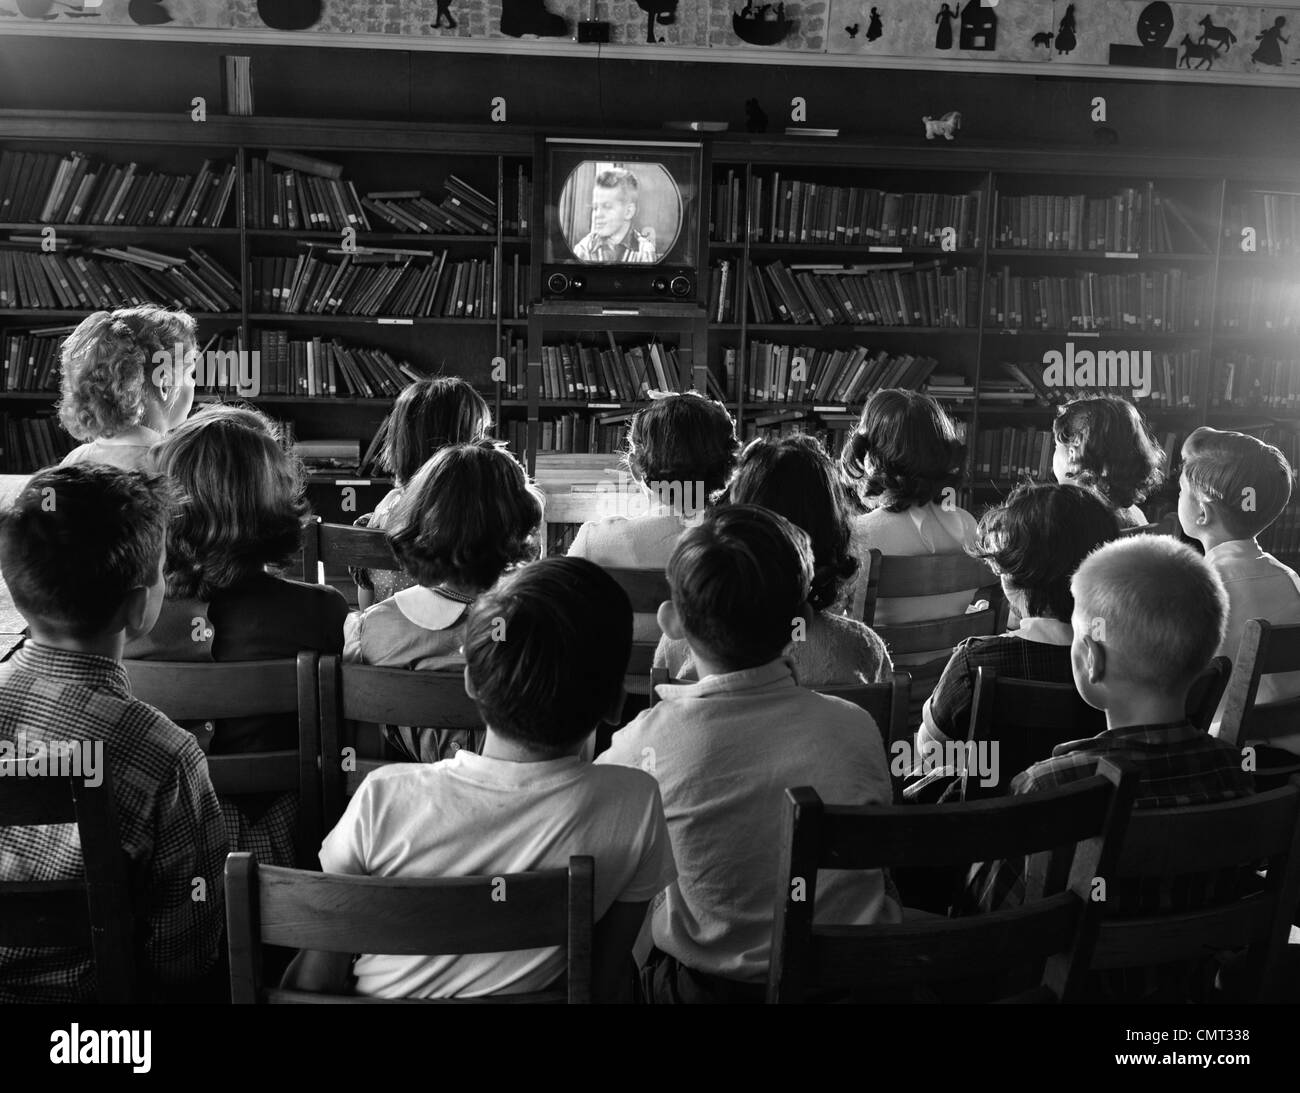 1950s BACK VIEW OF KIDS IN SCHOOL LIBRARY WATCHING TV SCREEN Stock Photo